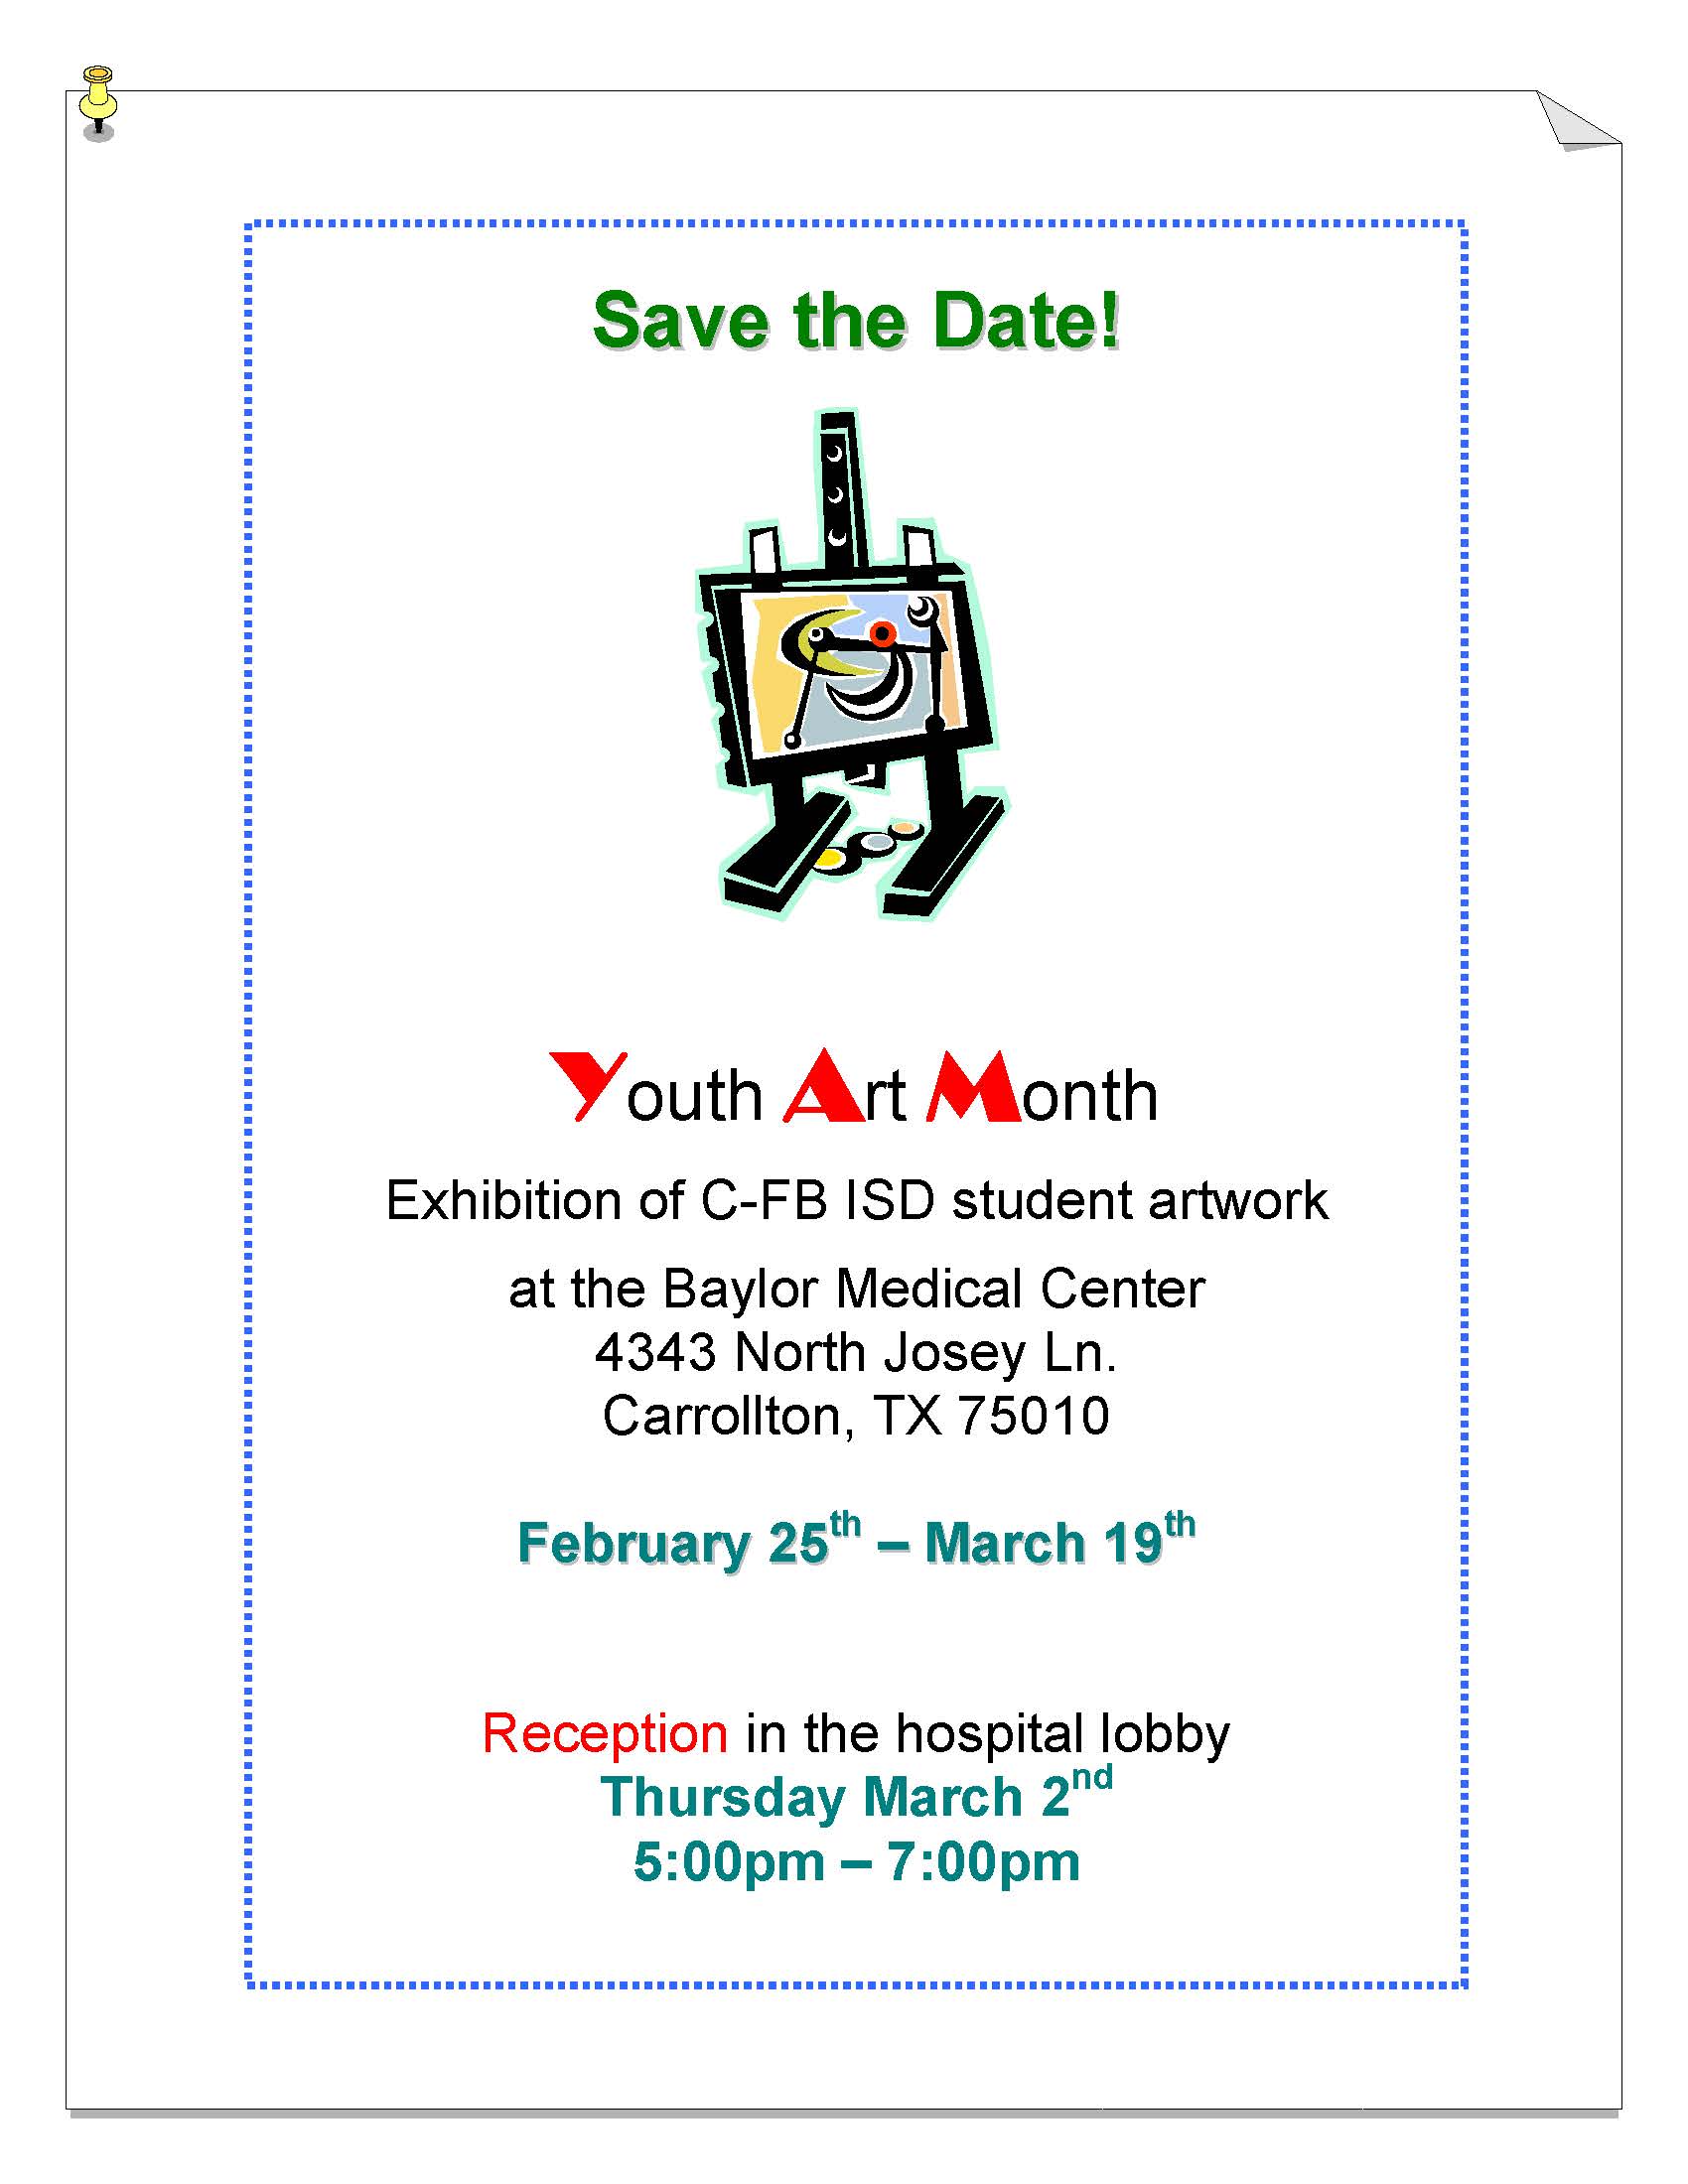 Youth Art Month Exhibition of C-FB ISD student artwork at the Baylor Medical Center 4343 North Josey Ln. Carrollton, TX 75010 February 25th – March 19th Reception in the hospital lobby Thursday March 2nd 5:00pm – 7:00pm